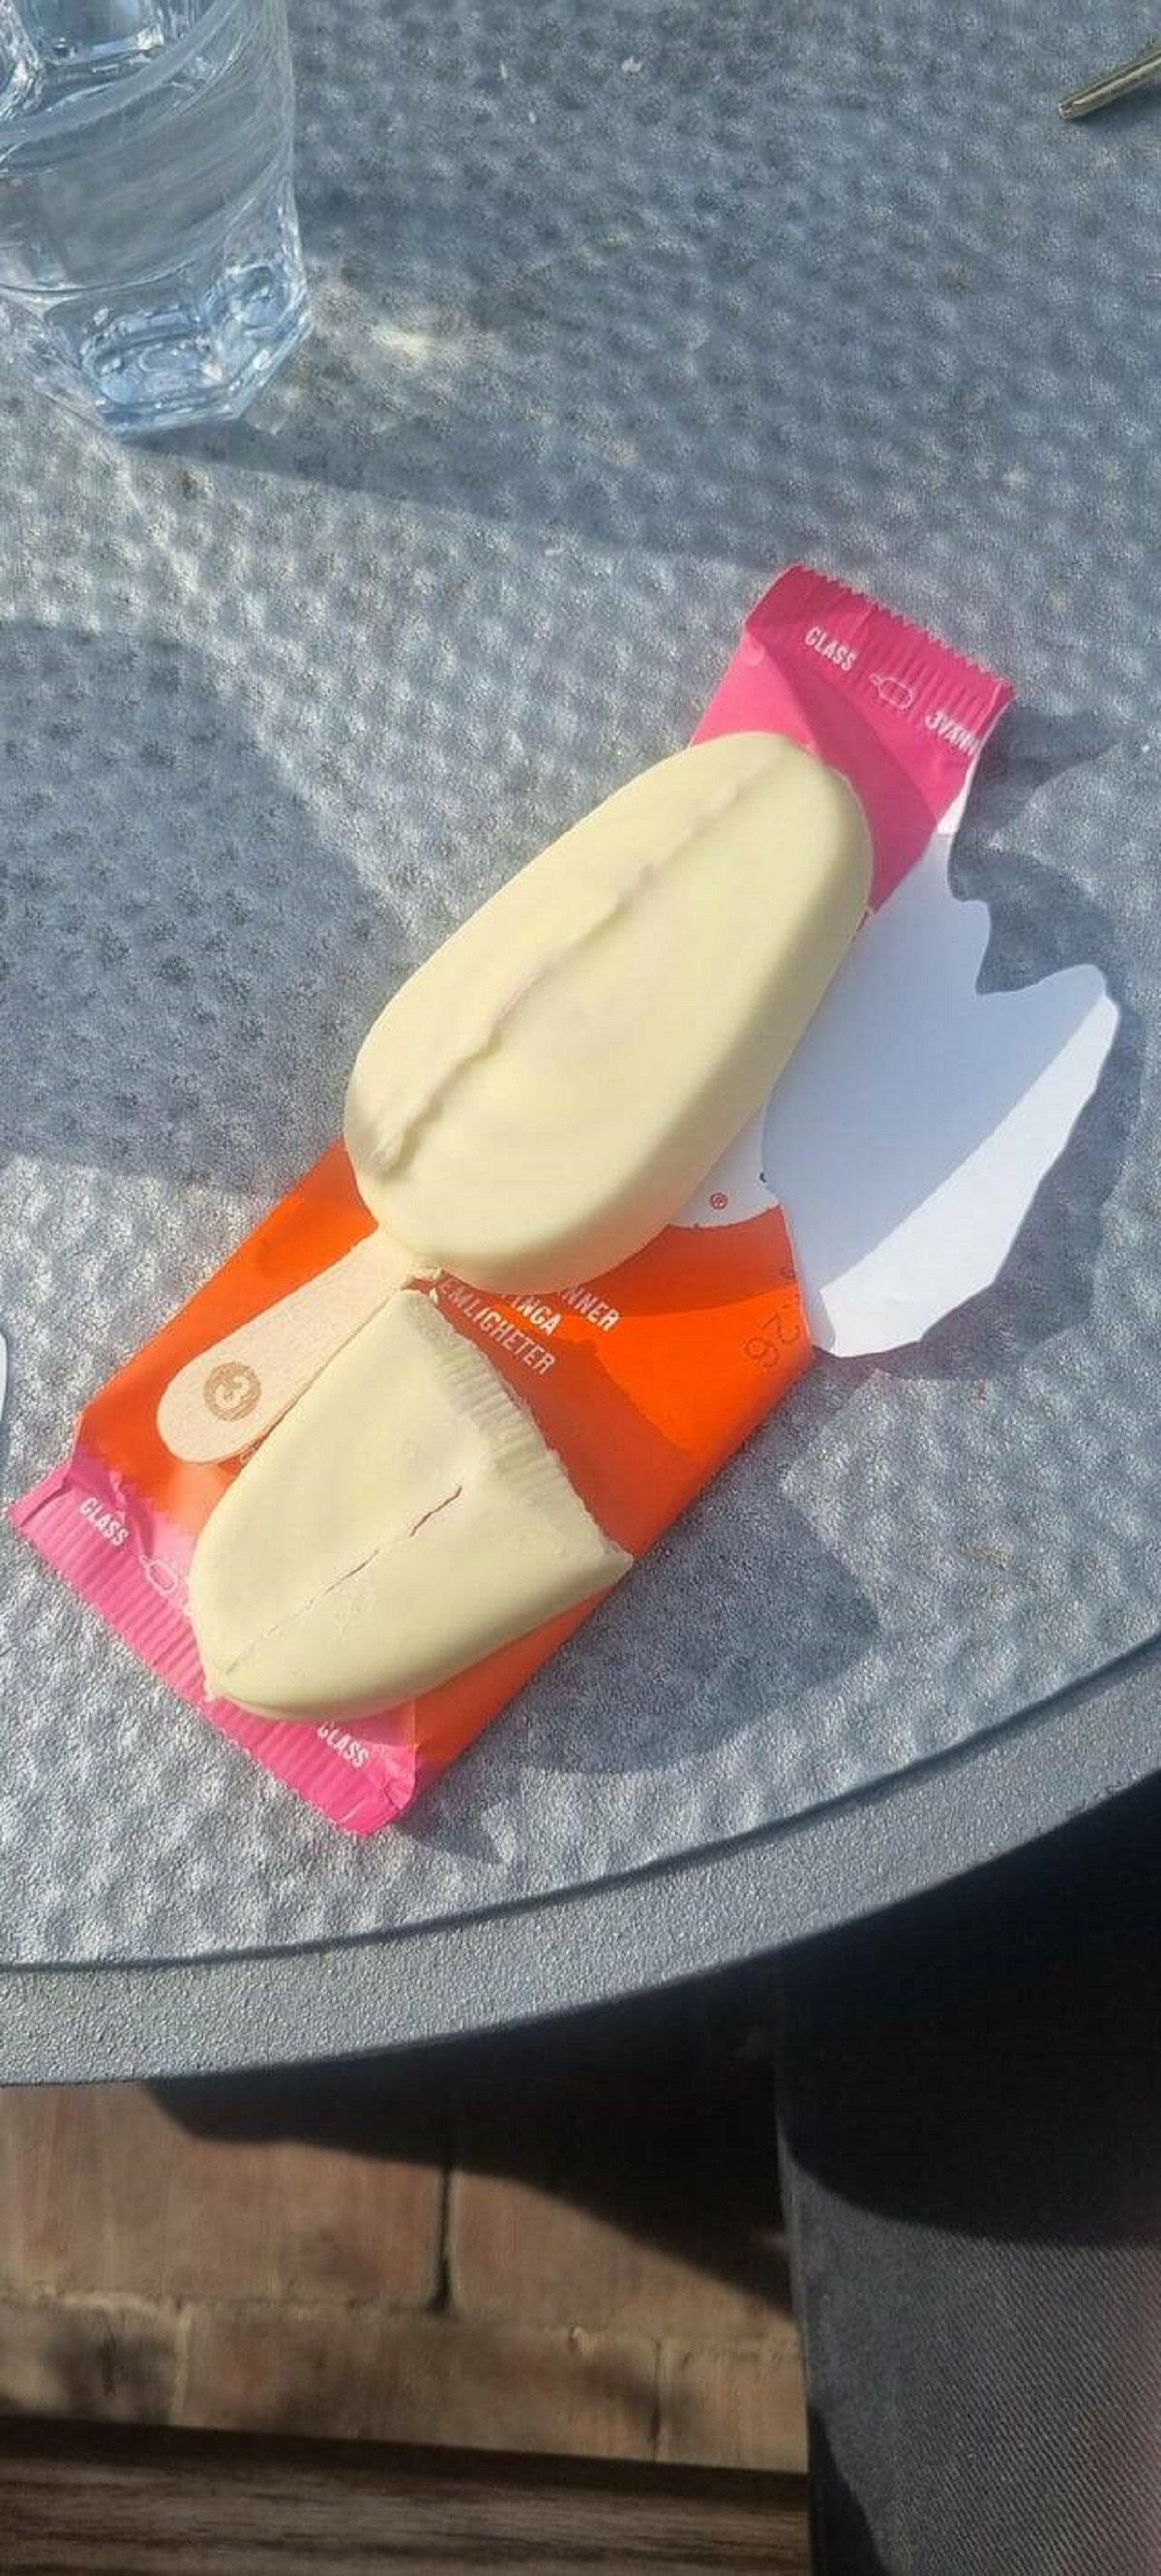 "Got one and a half ice cream in the same packaging yesterday"